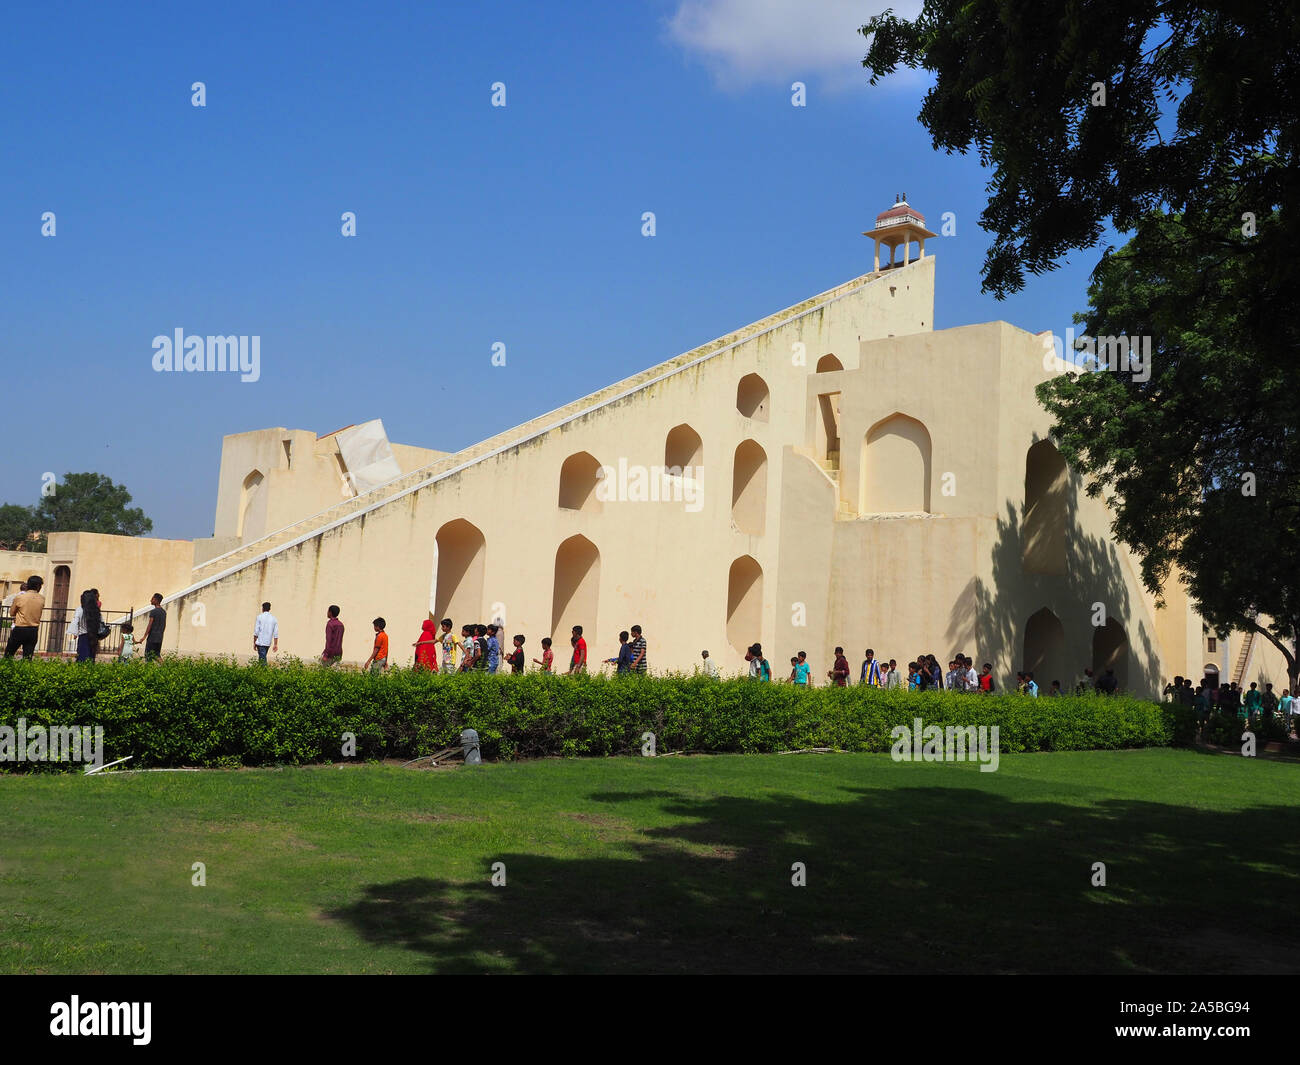 Indian school students visiting the Jantar Mantar Astronomical Observatory in Jaipur, Rajasthan, India. Stock Photo